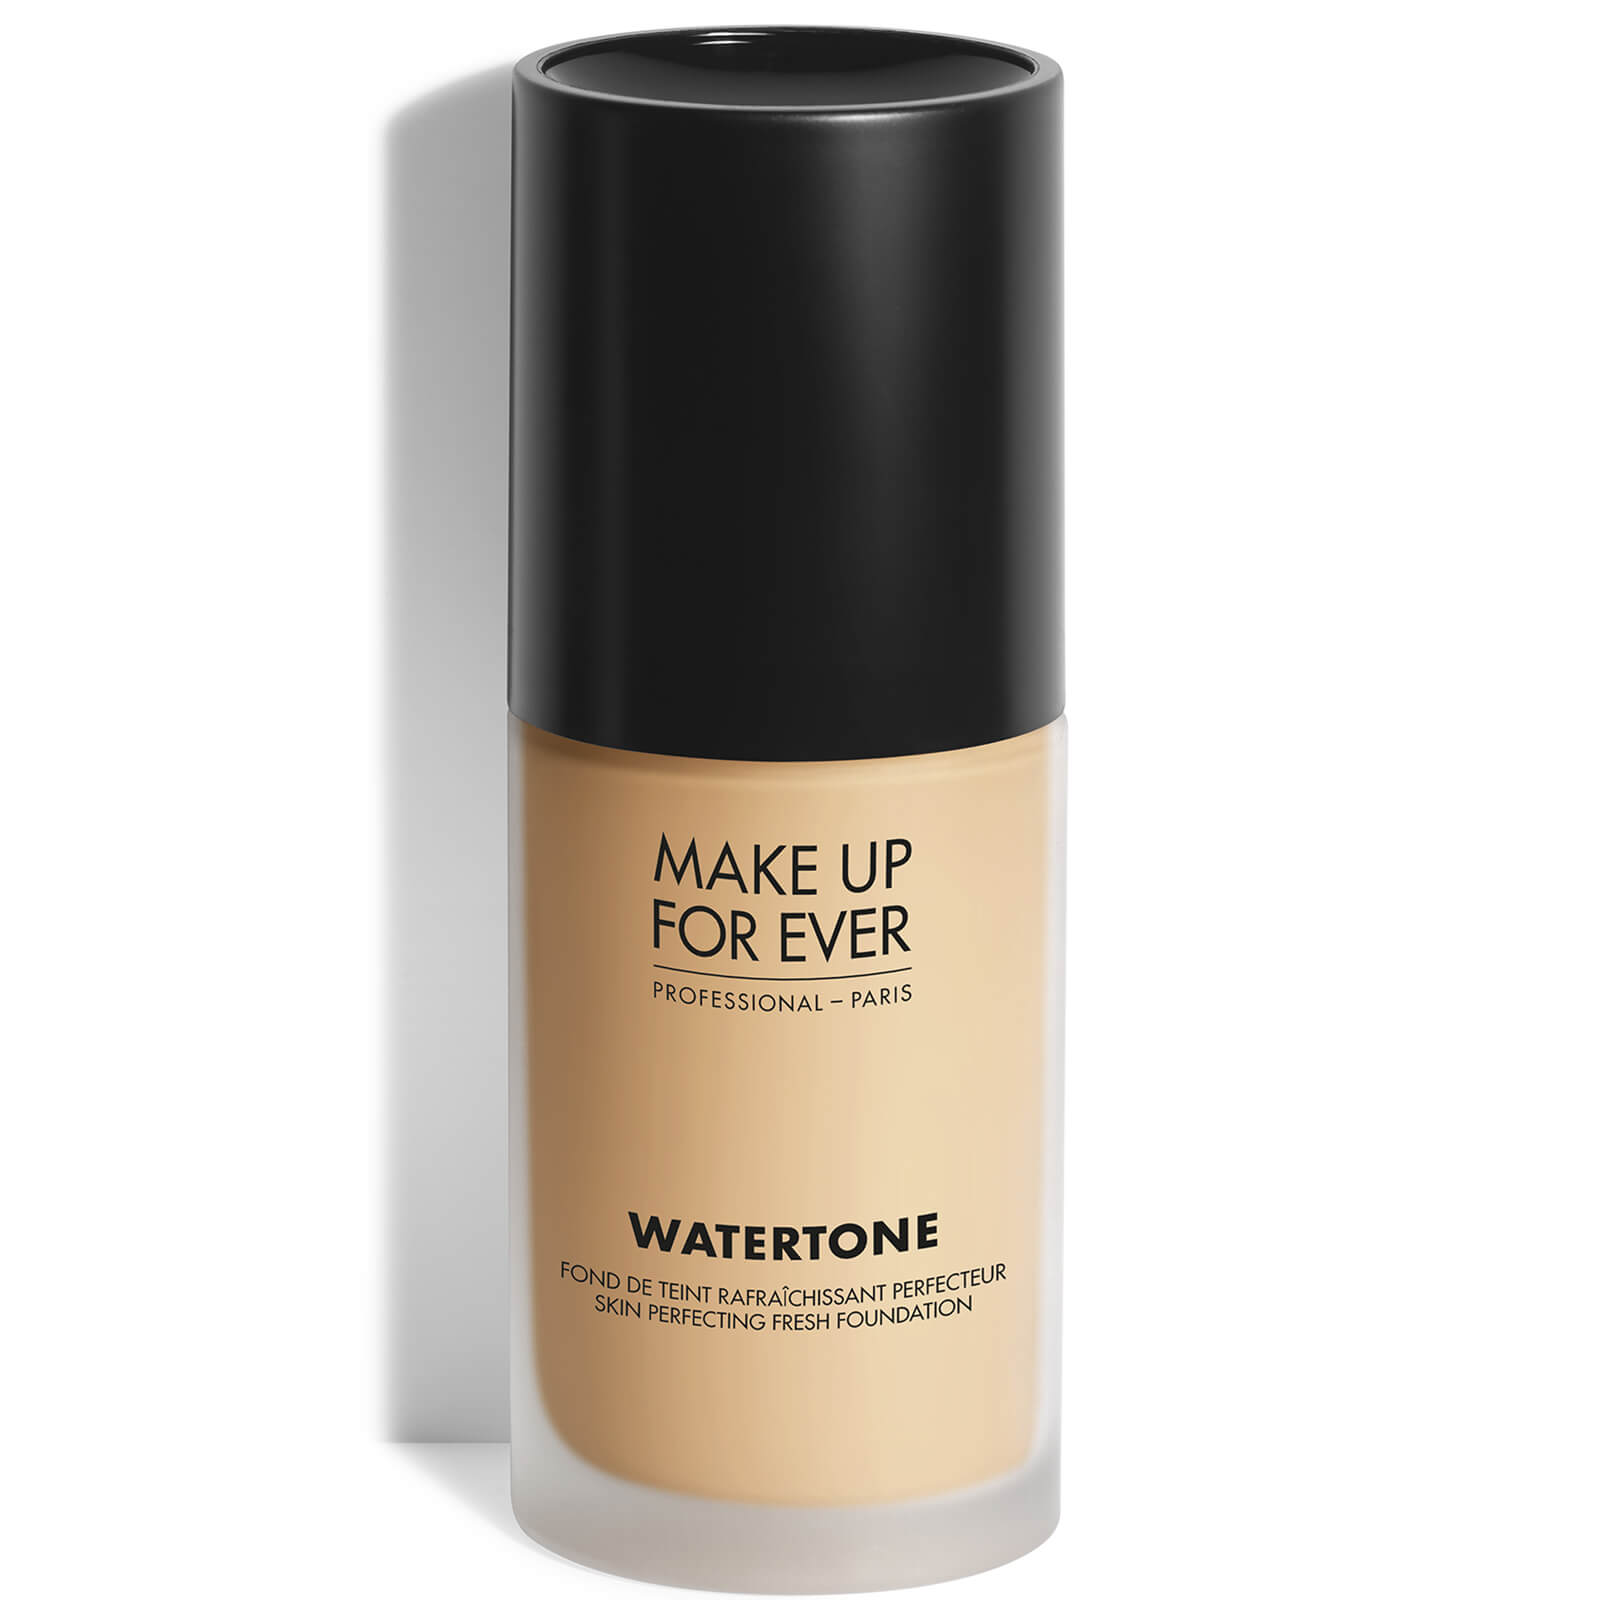 MAKE UP FOR EVER watertone Foundation No Transfer and Natural Radiant Finish 40ml (Various Shades) - - Y225-Marble